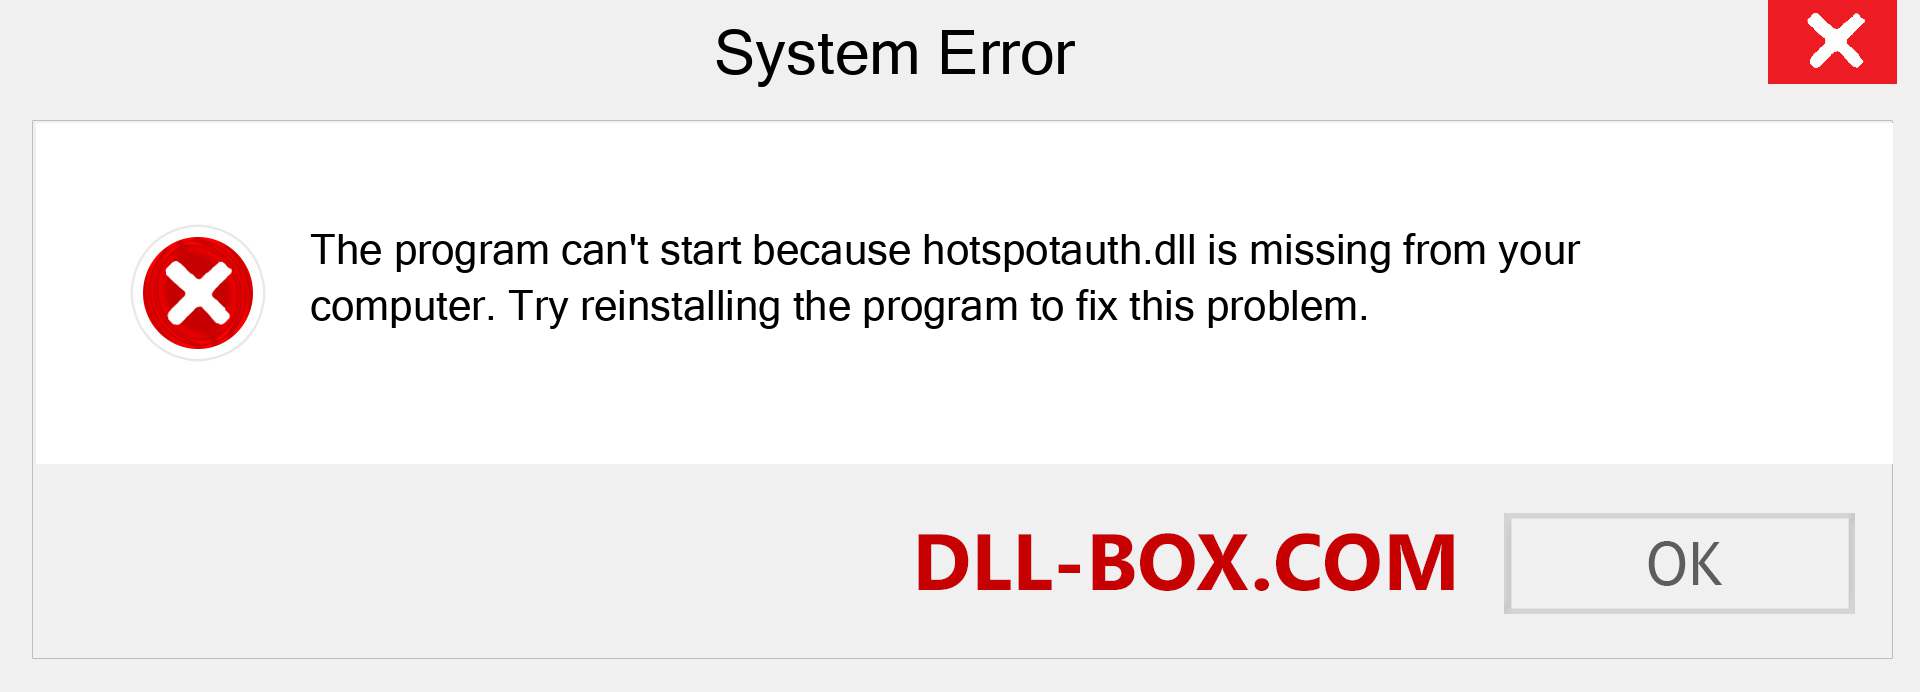  hotspotauth.dll file is missing?. Download for Windows 7, 8, 10 - Fix  hotspotauth dll Missing Error on Windows, photos, images